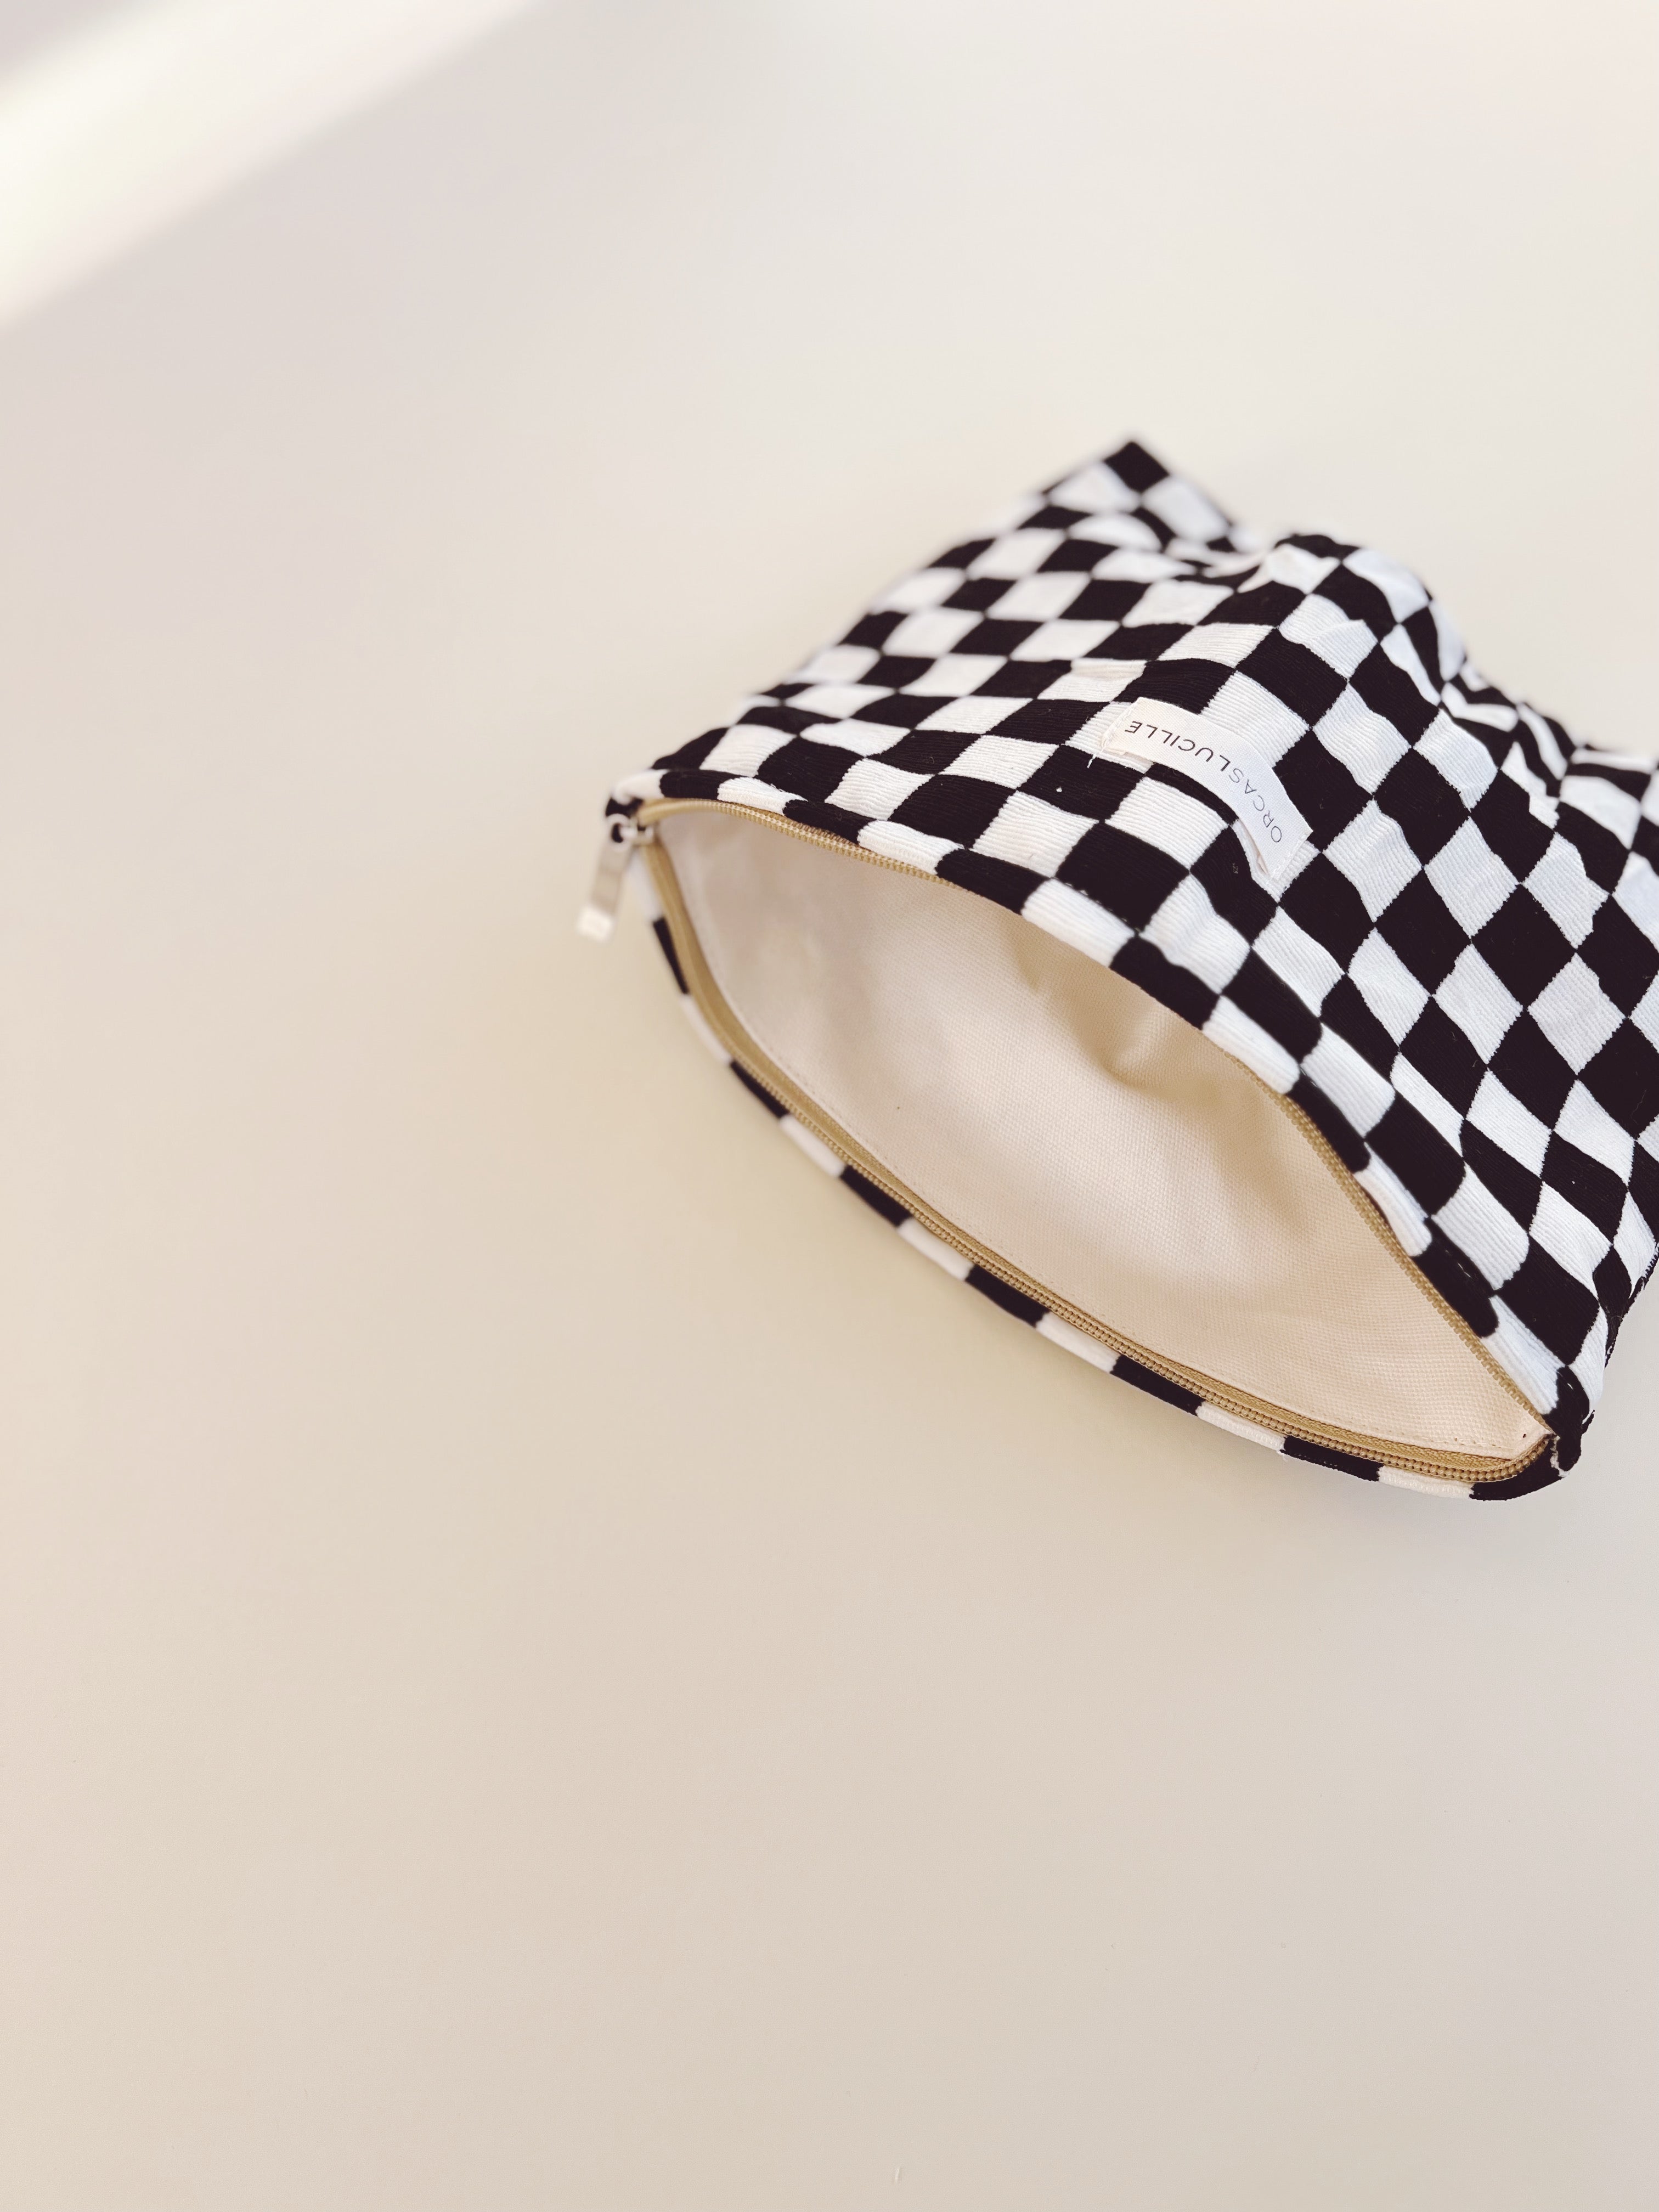 Checkered Pouch - B&W - Orcas Lucille